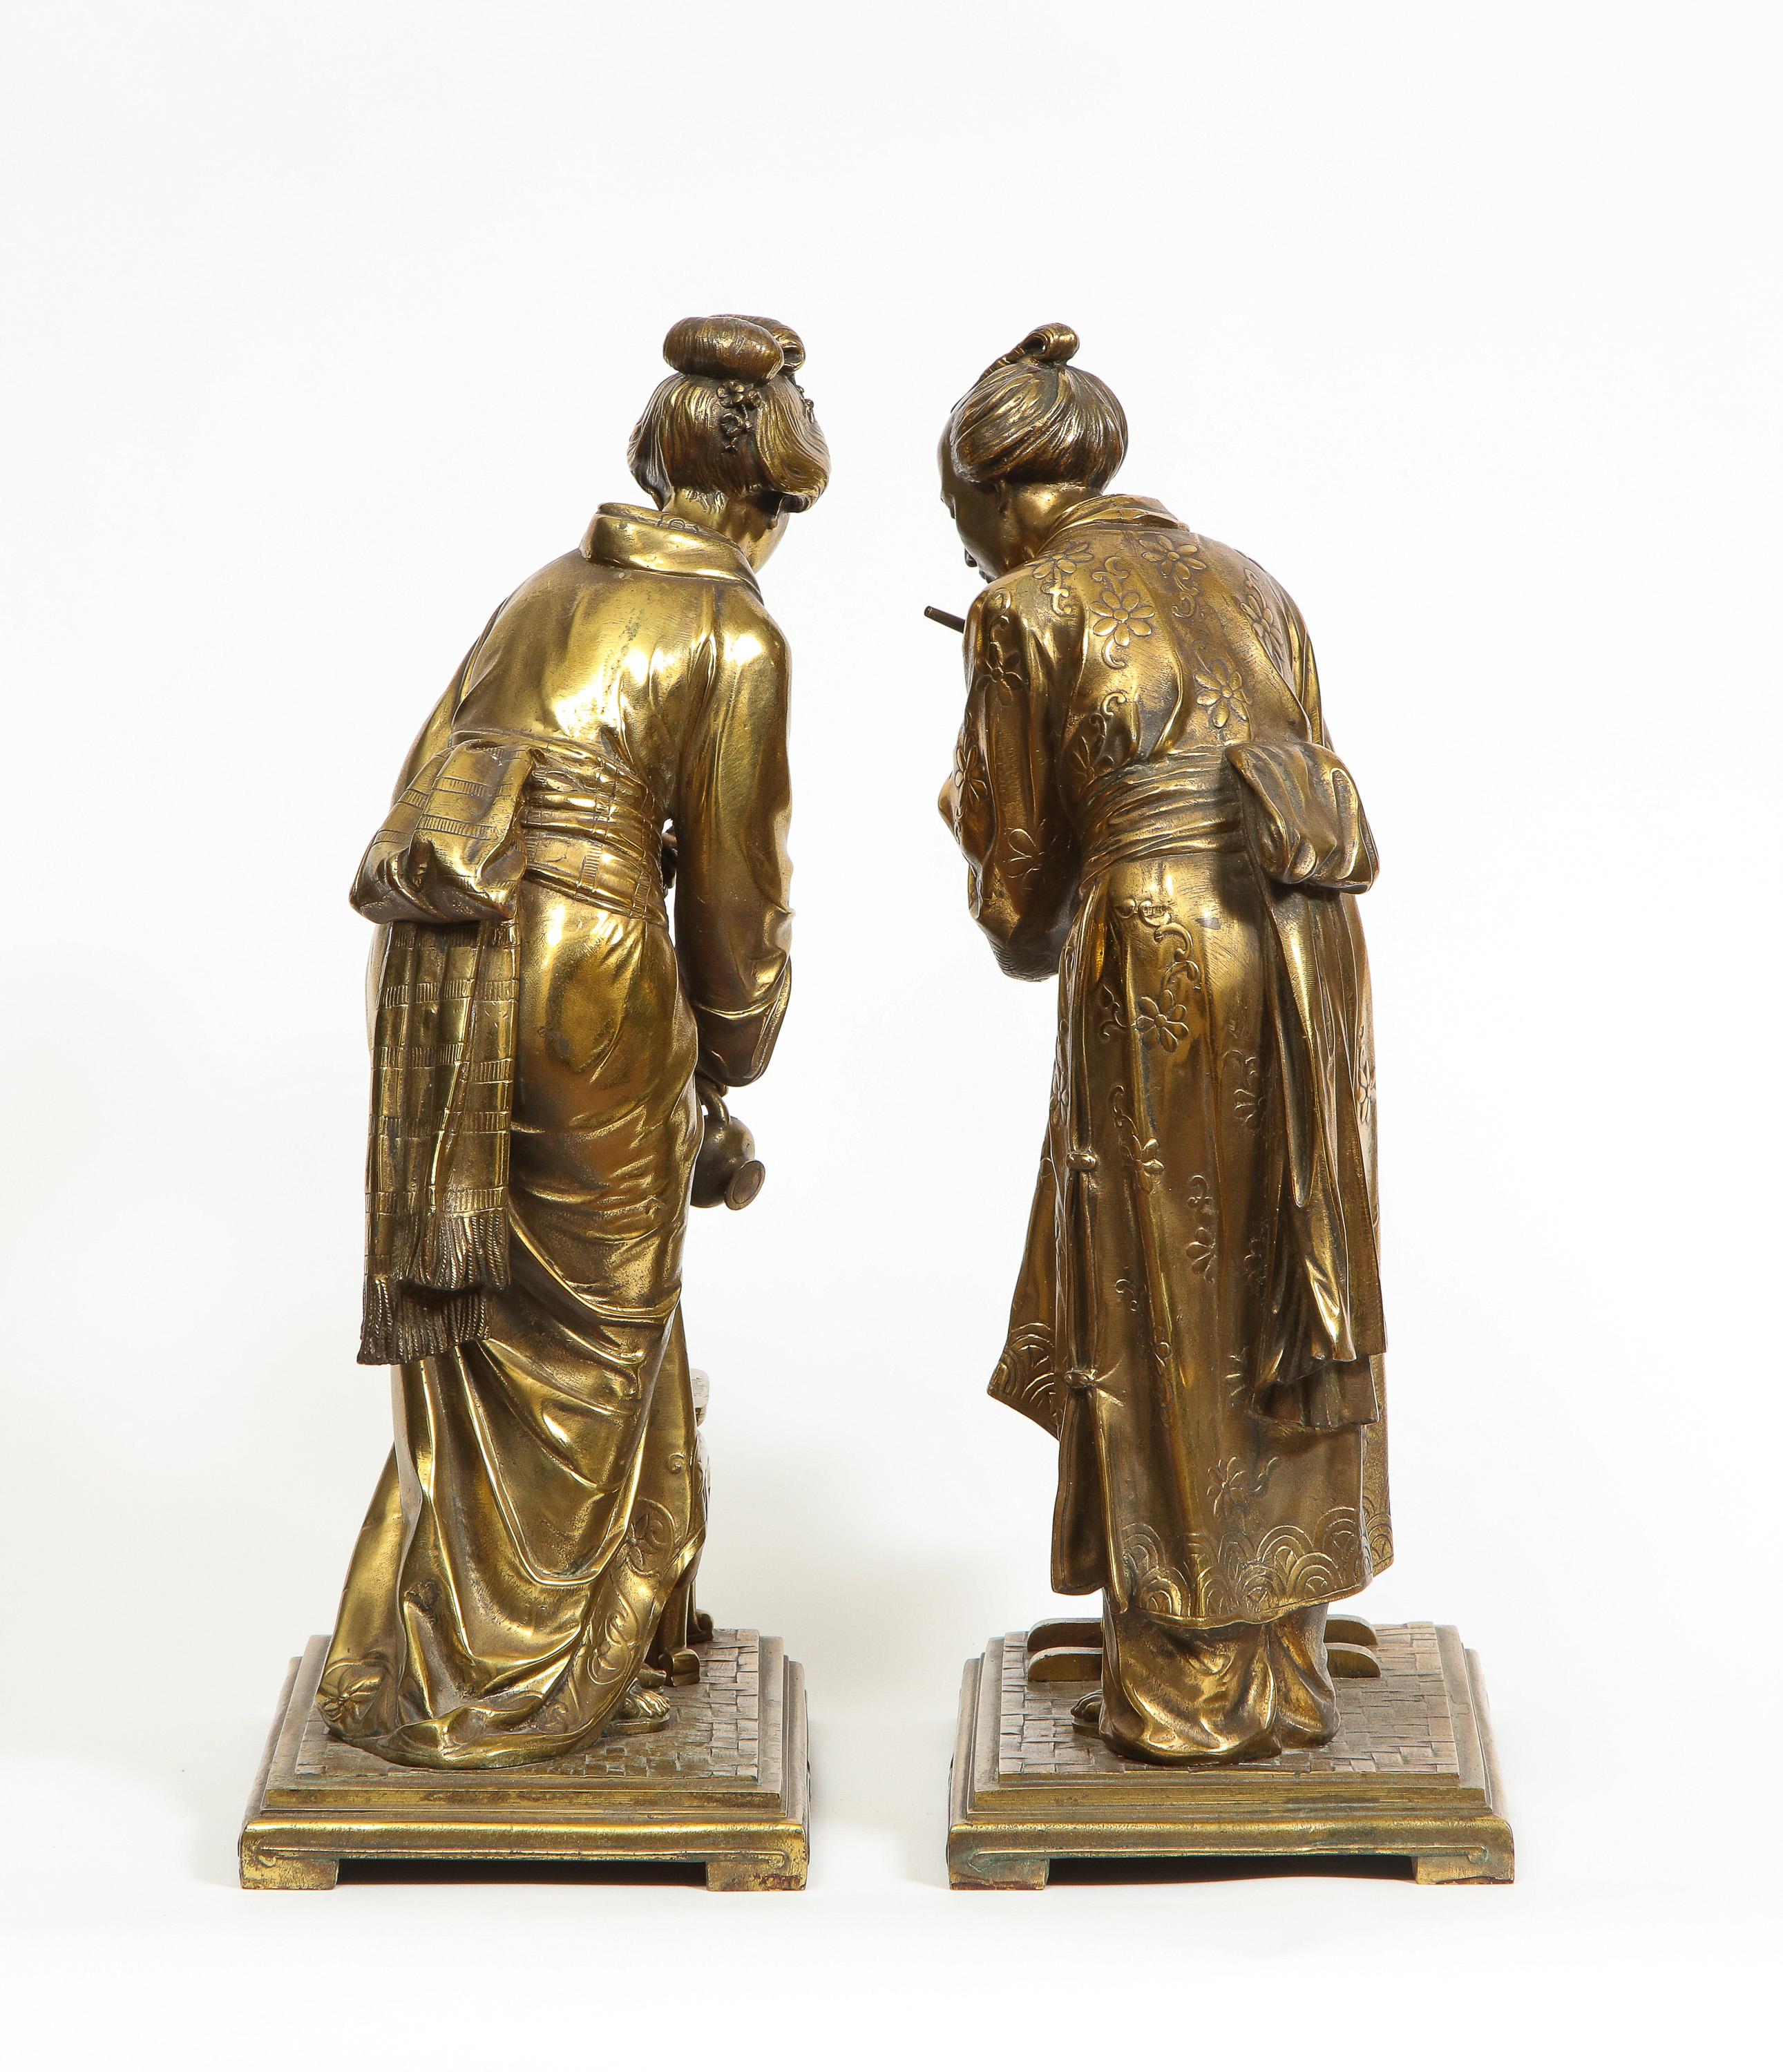 A Rare Pair of French Japonisme Bronze Sculptures by Eugene Laurent, circa 1870 8